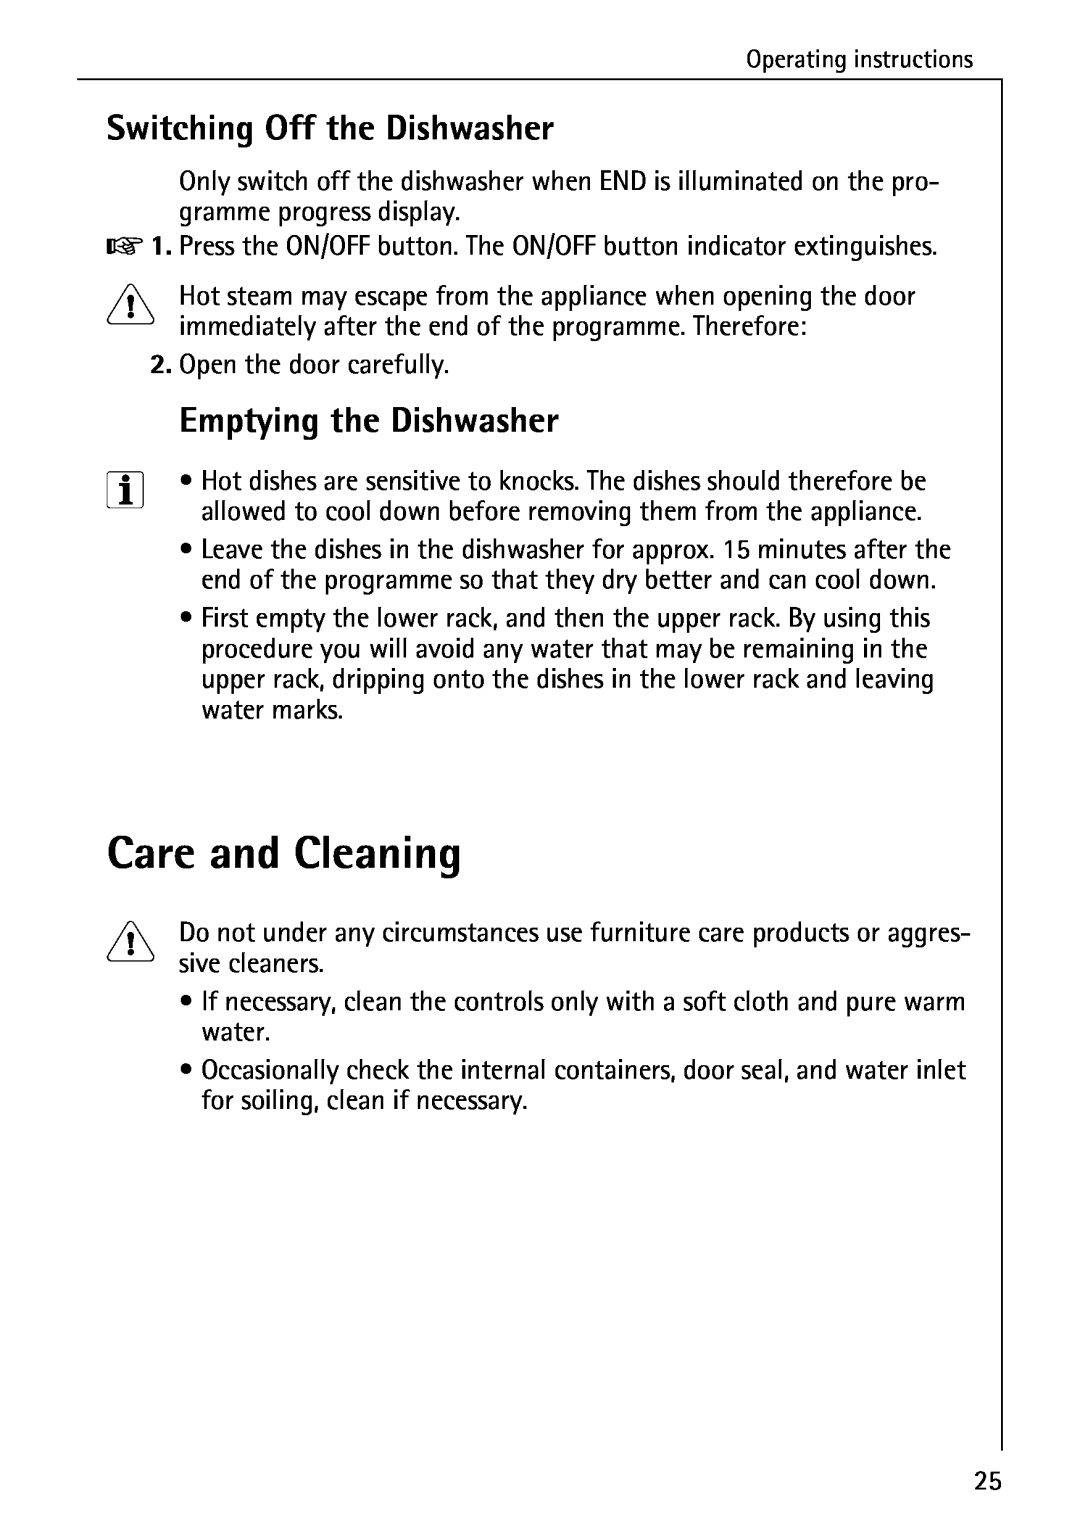 AEG 4270 I manual Care and Cleaning, Switching Off the Dishwasher, Emptying the Dishwasher 